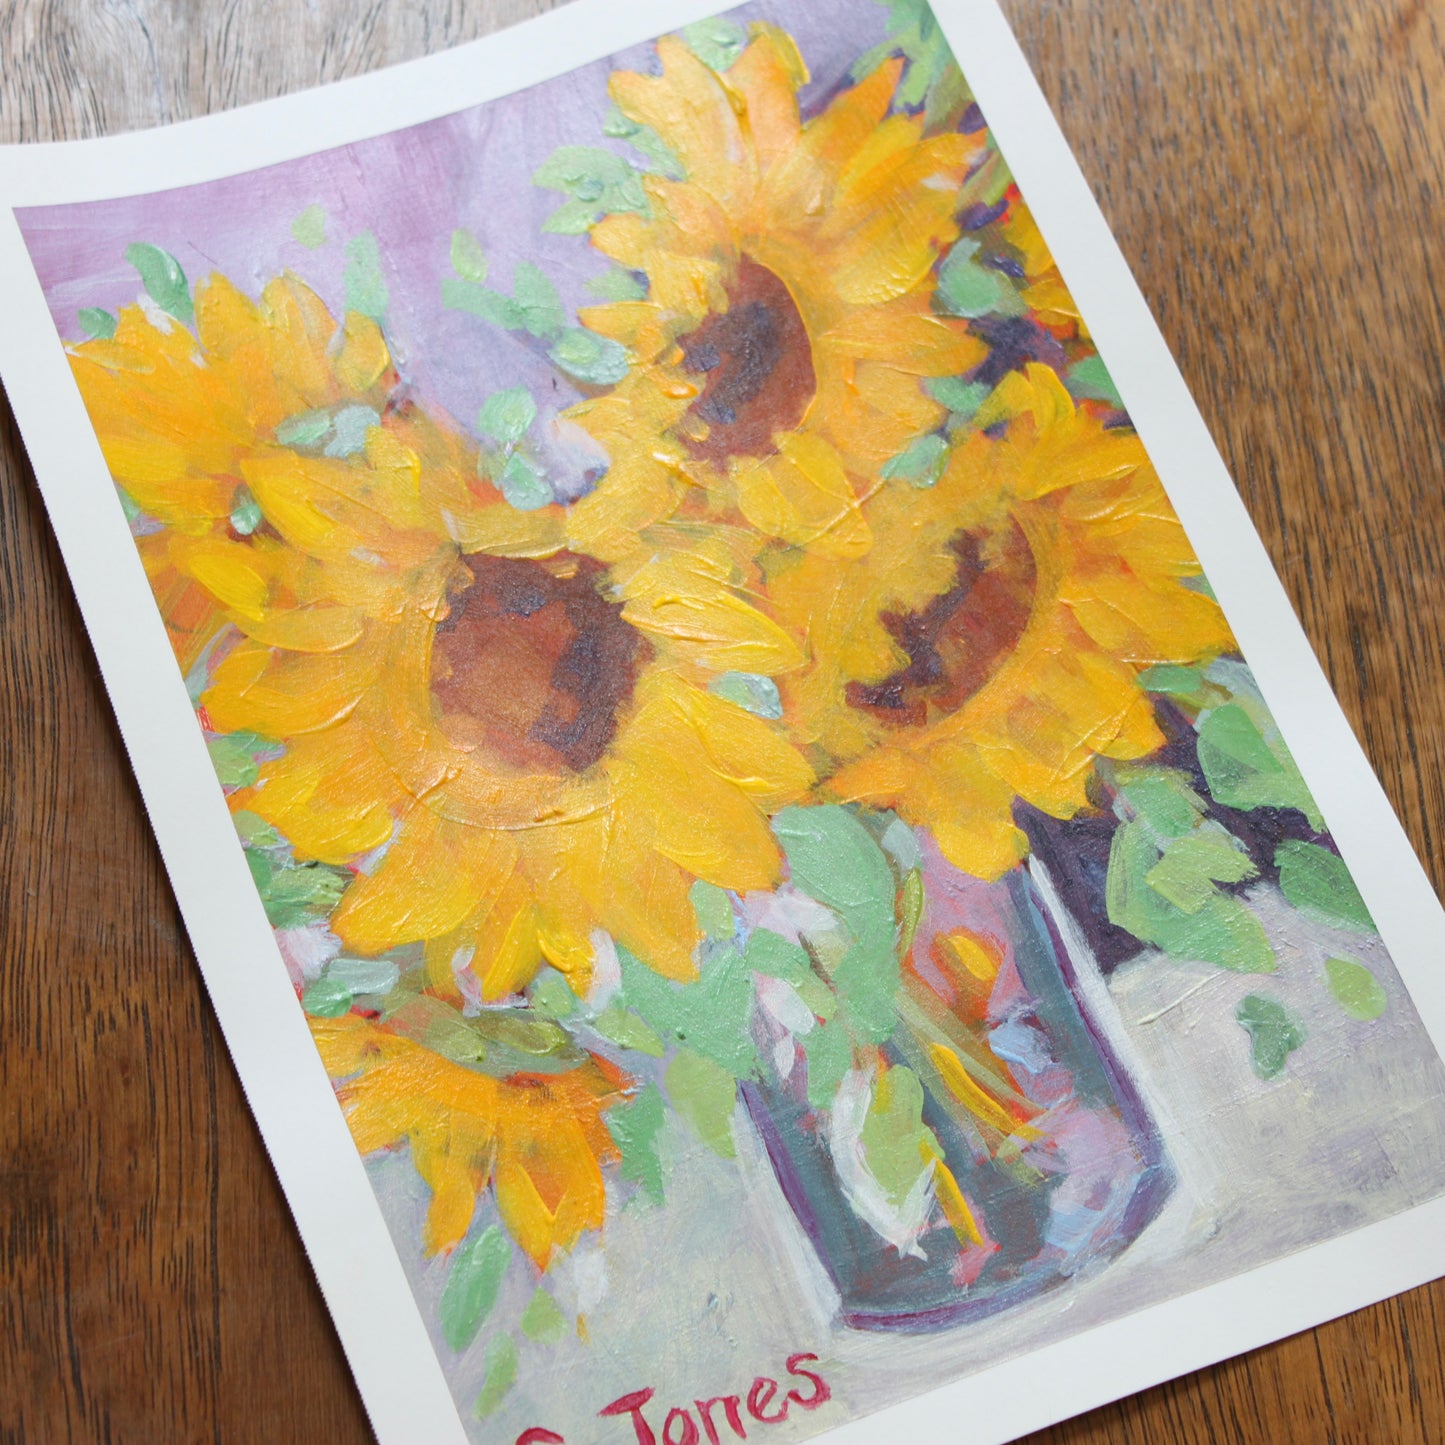 Sunflowers on paper